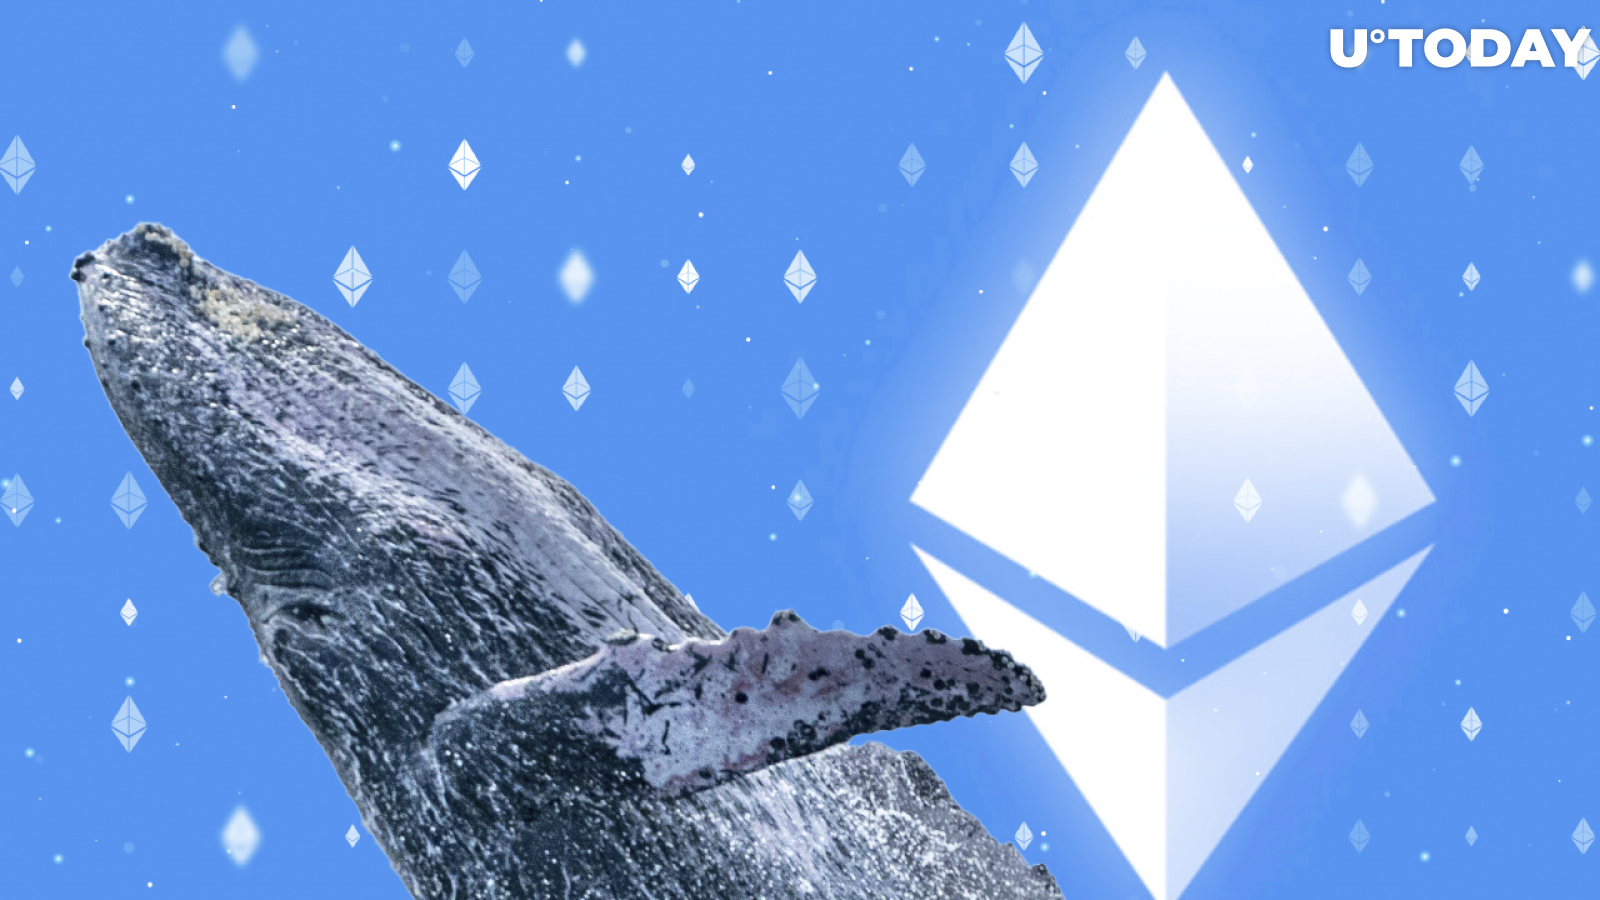 Ethereum Whale Buys $100 Million Worth of Coins, Down 4%